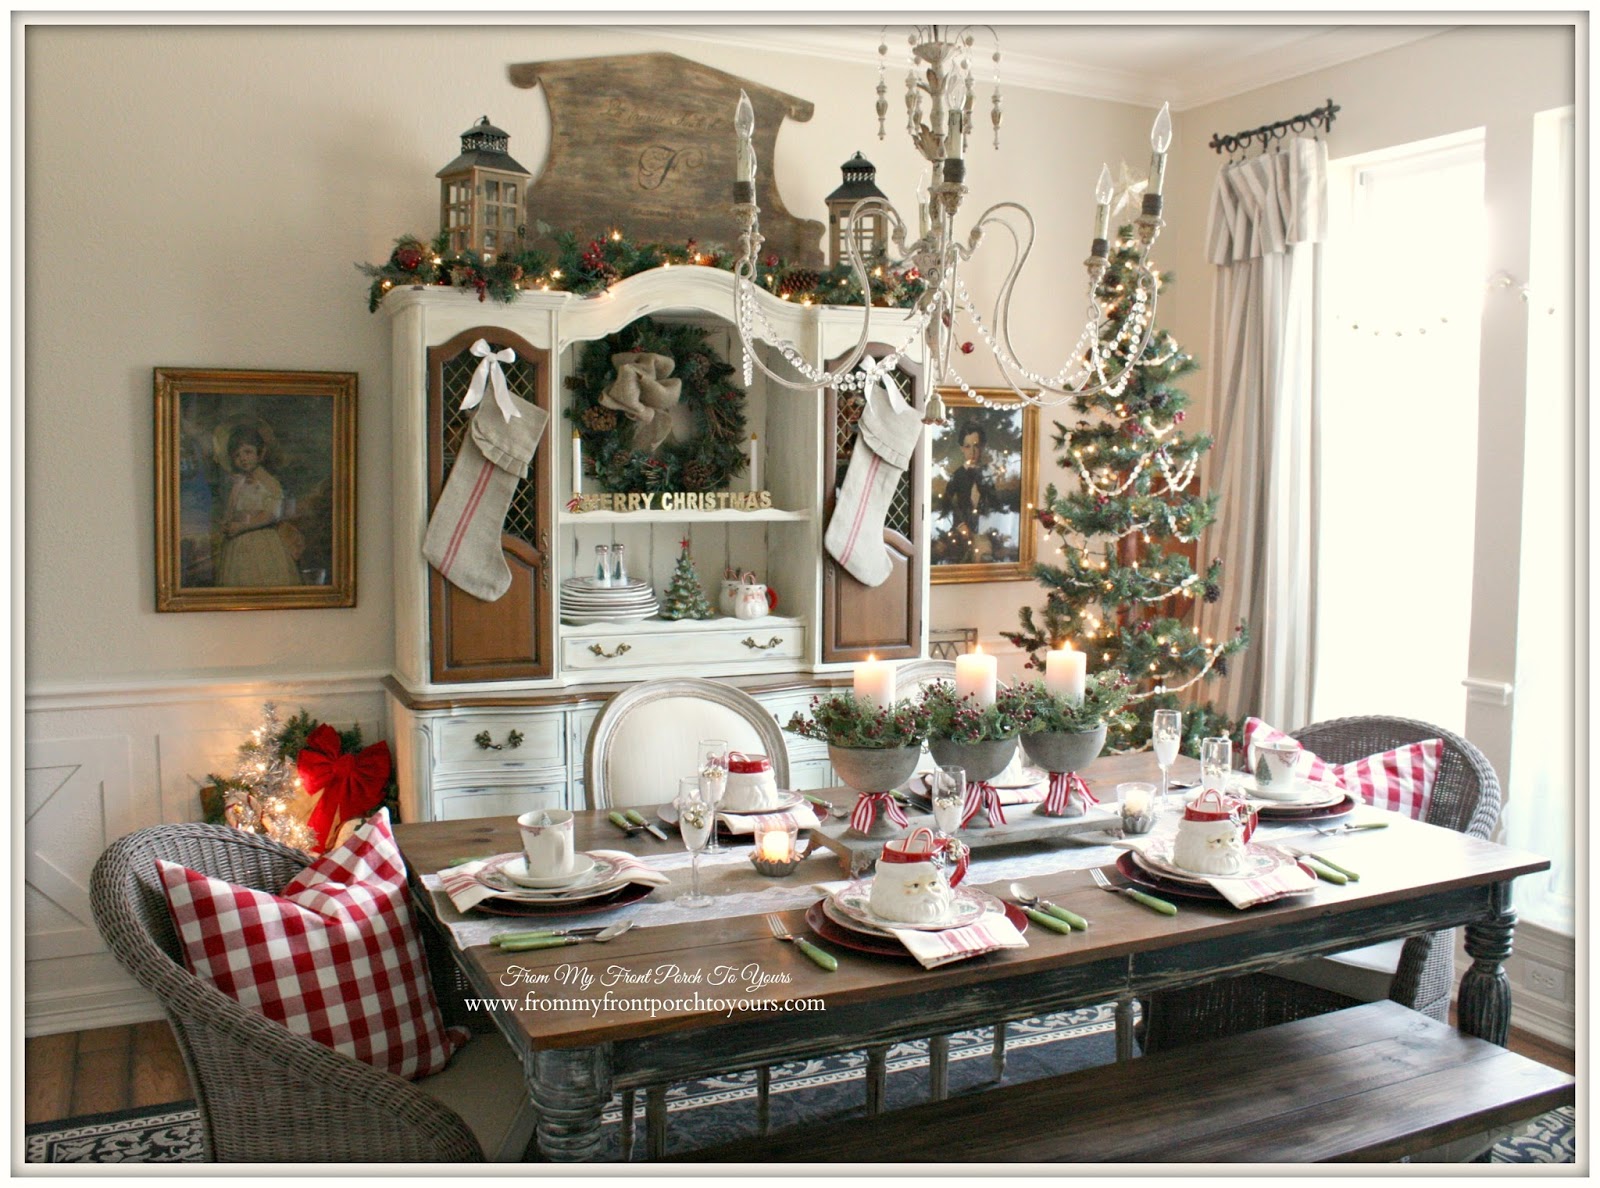 French Farmhouse Vintage Christmas Dining Room- From My Front Porch To Yours